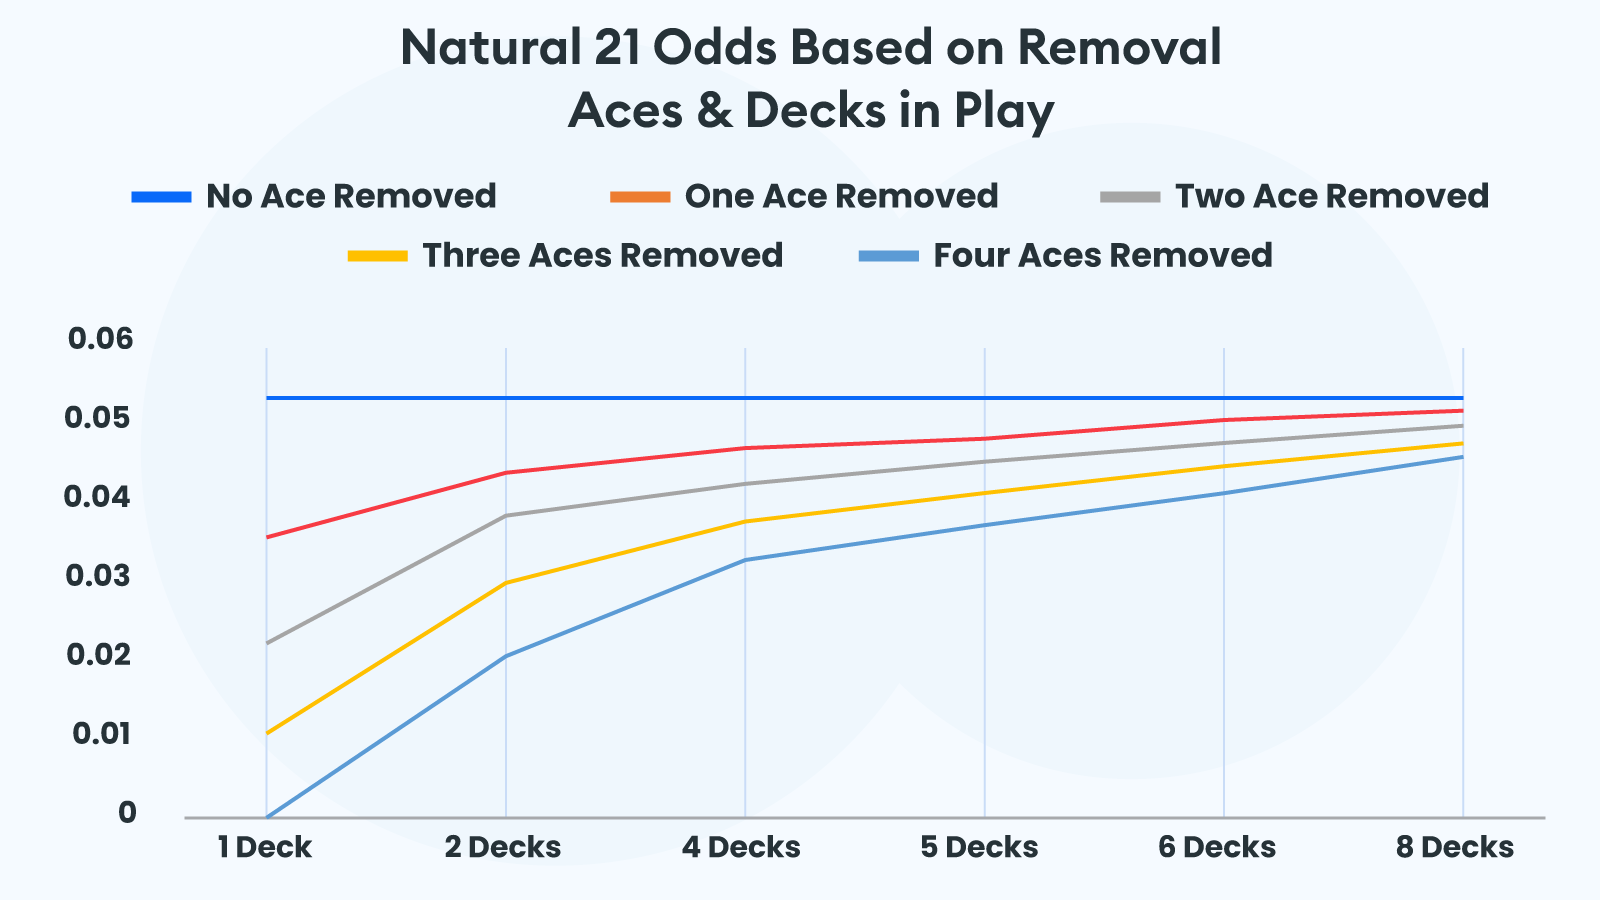 Natural 21 Odds Based on Removal Aces&Decks in Play